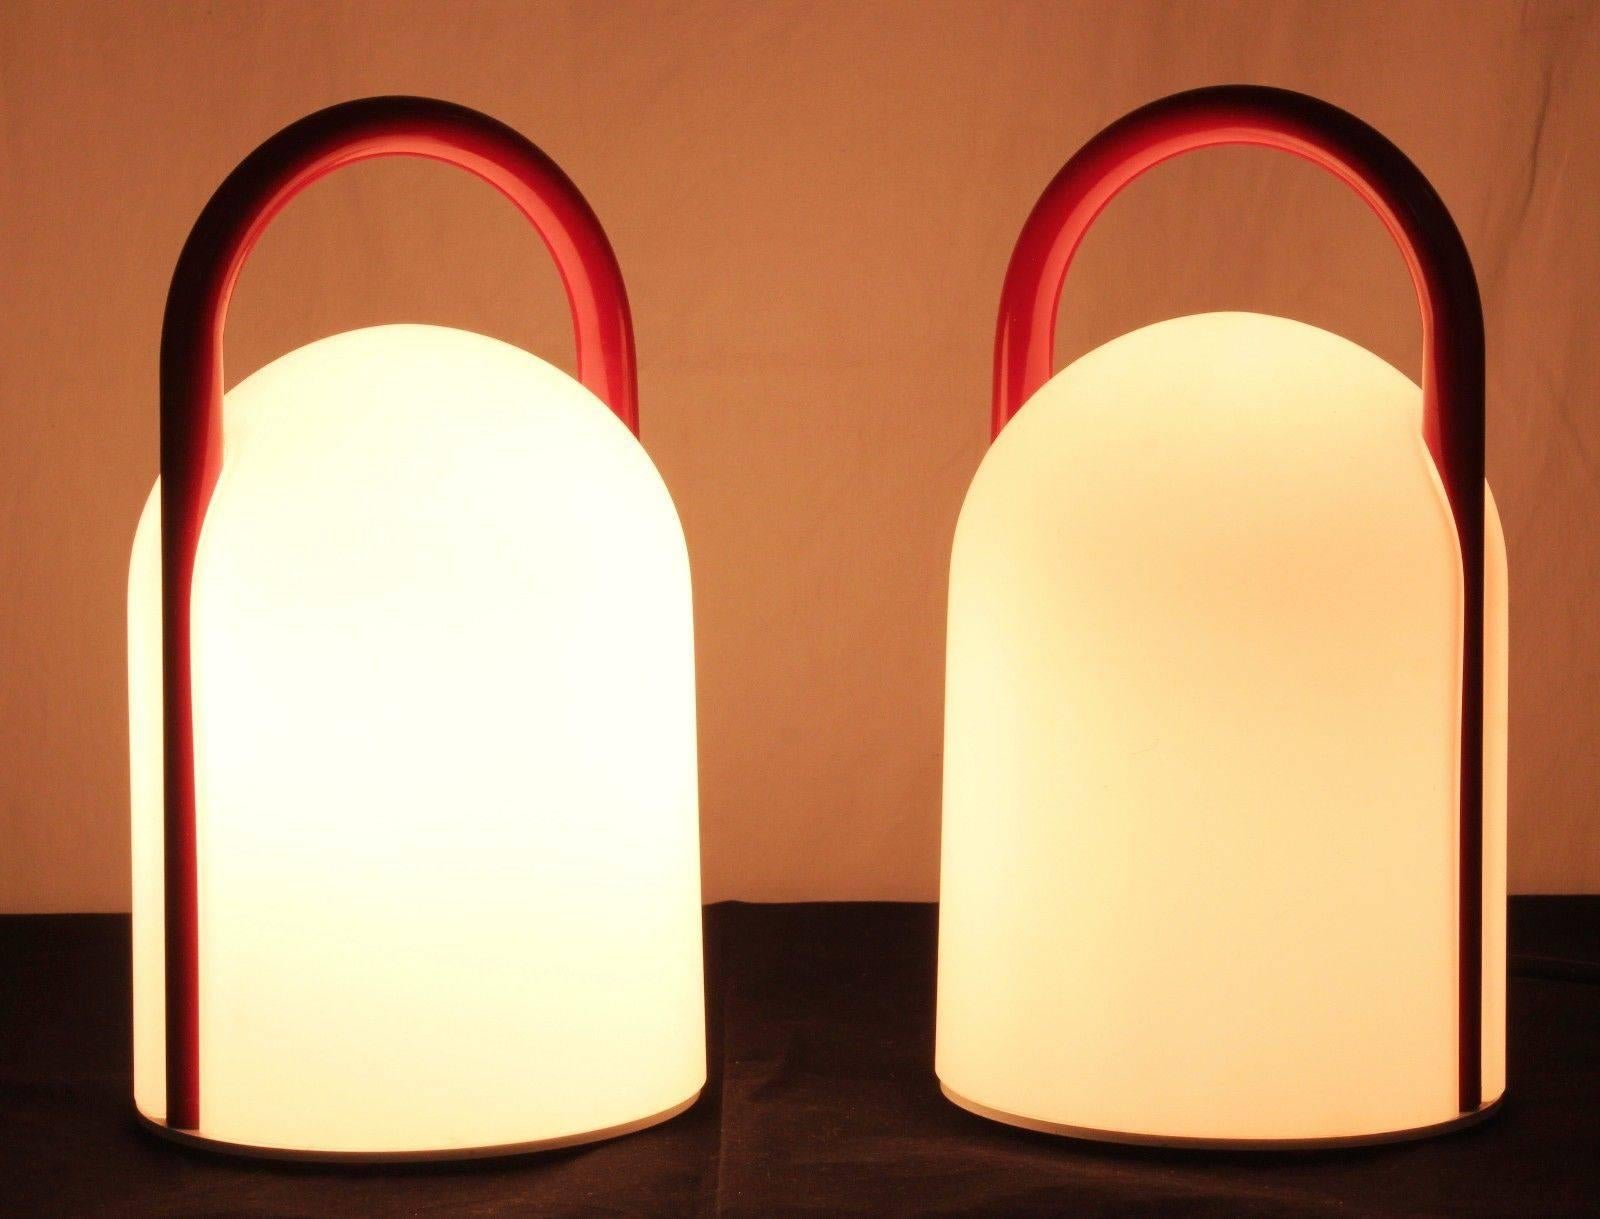 Pair of 1980s Romolo Lanciani Tender Table Lamps for Tronconi. Executed in opaline glass and red enameled metal, Italy, circa 1980s. A surprisingly refined and minimal design, especially for its time and place. 

Price is for the pair. Three lamps